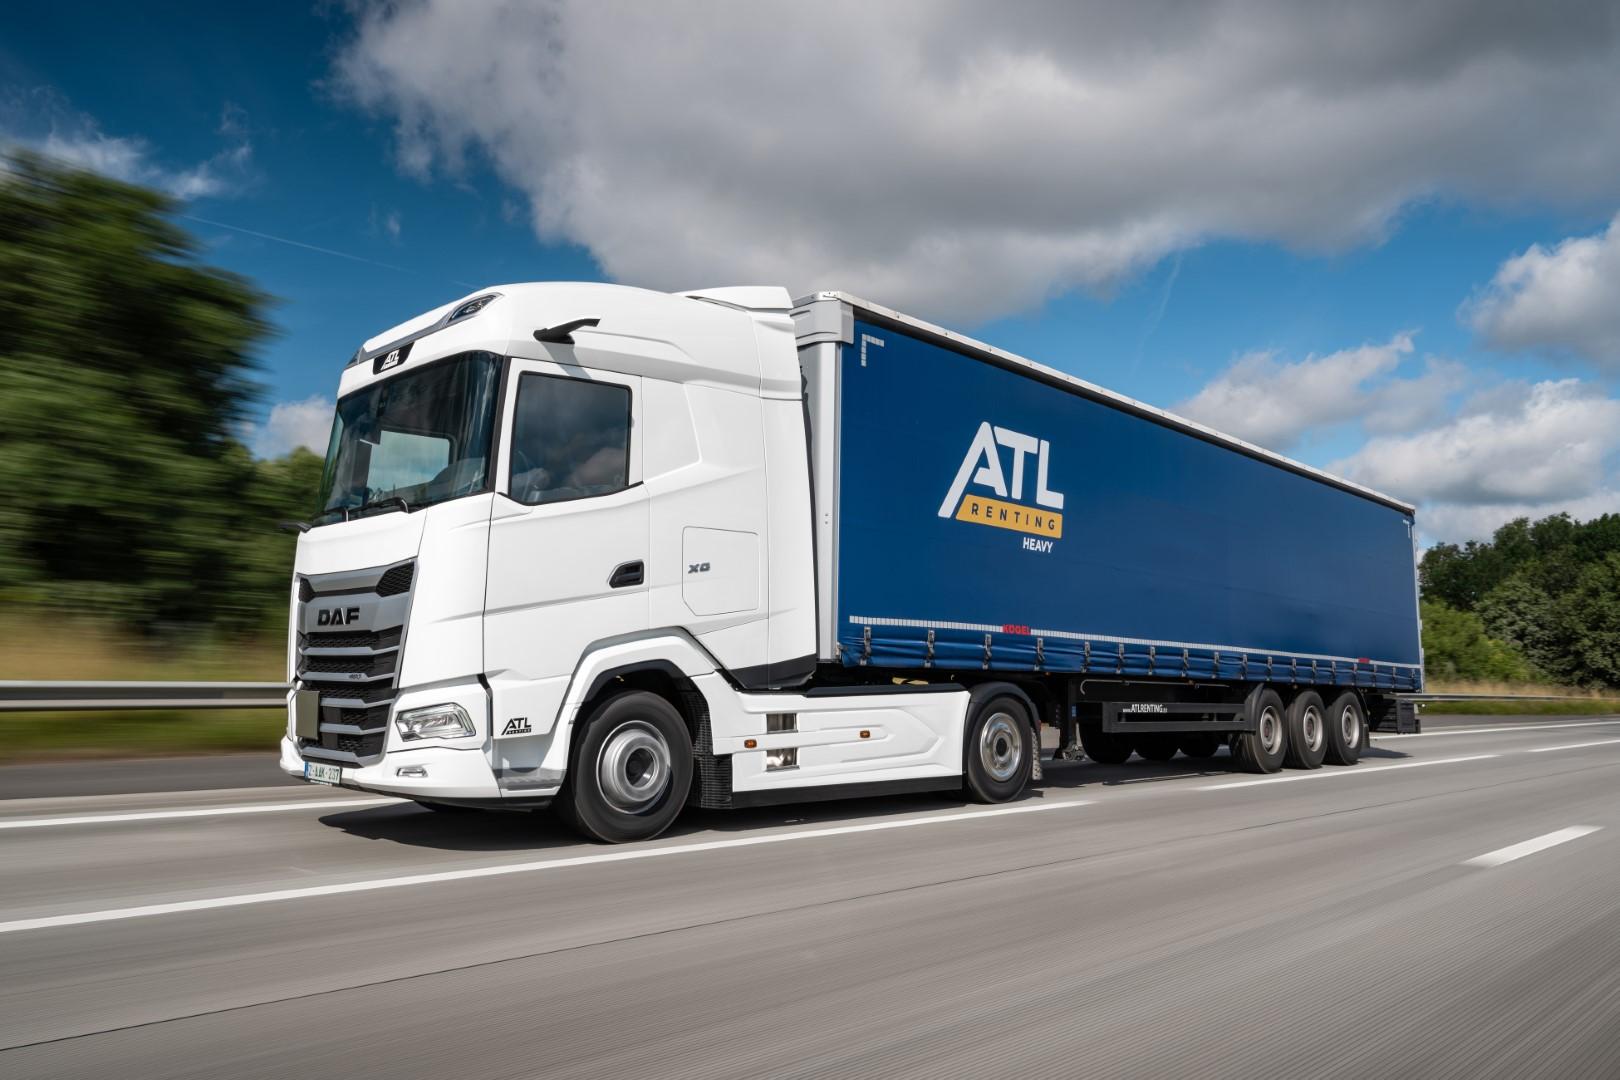 DAF-Belgian ATL Renting has taken its 2,000th DAF truck into service. This DAF XG 480 FT joins ATL Renting’s fleet, which provides all kinds of long-term rental options for trucks, trailers, vans and other vehicles to businesses across Europe.